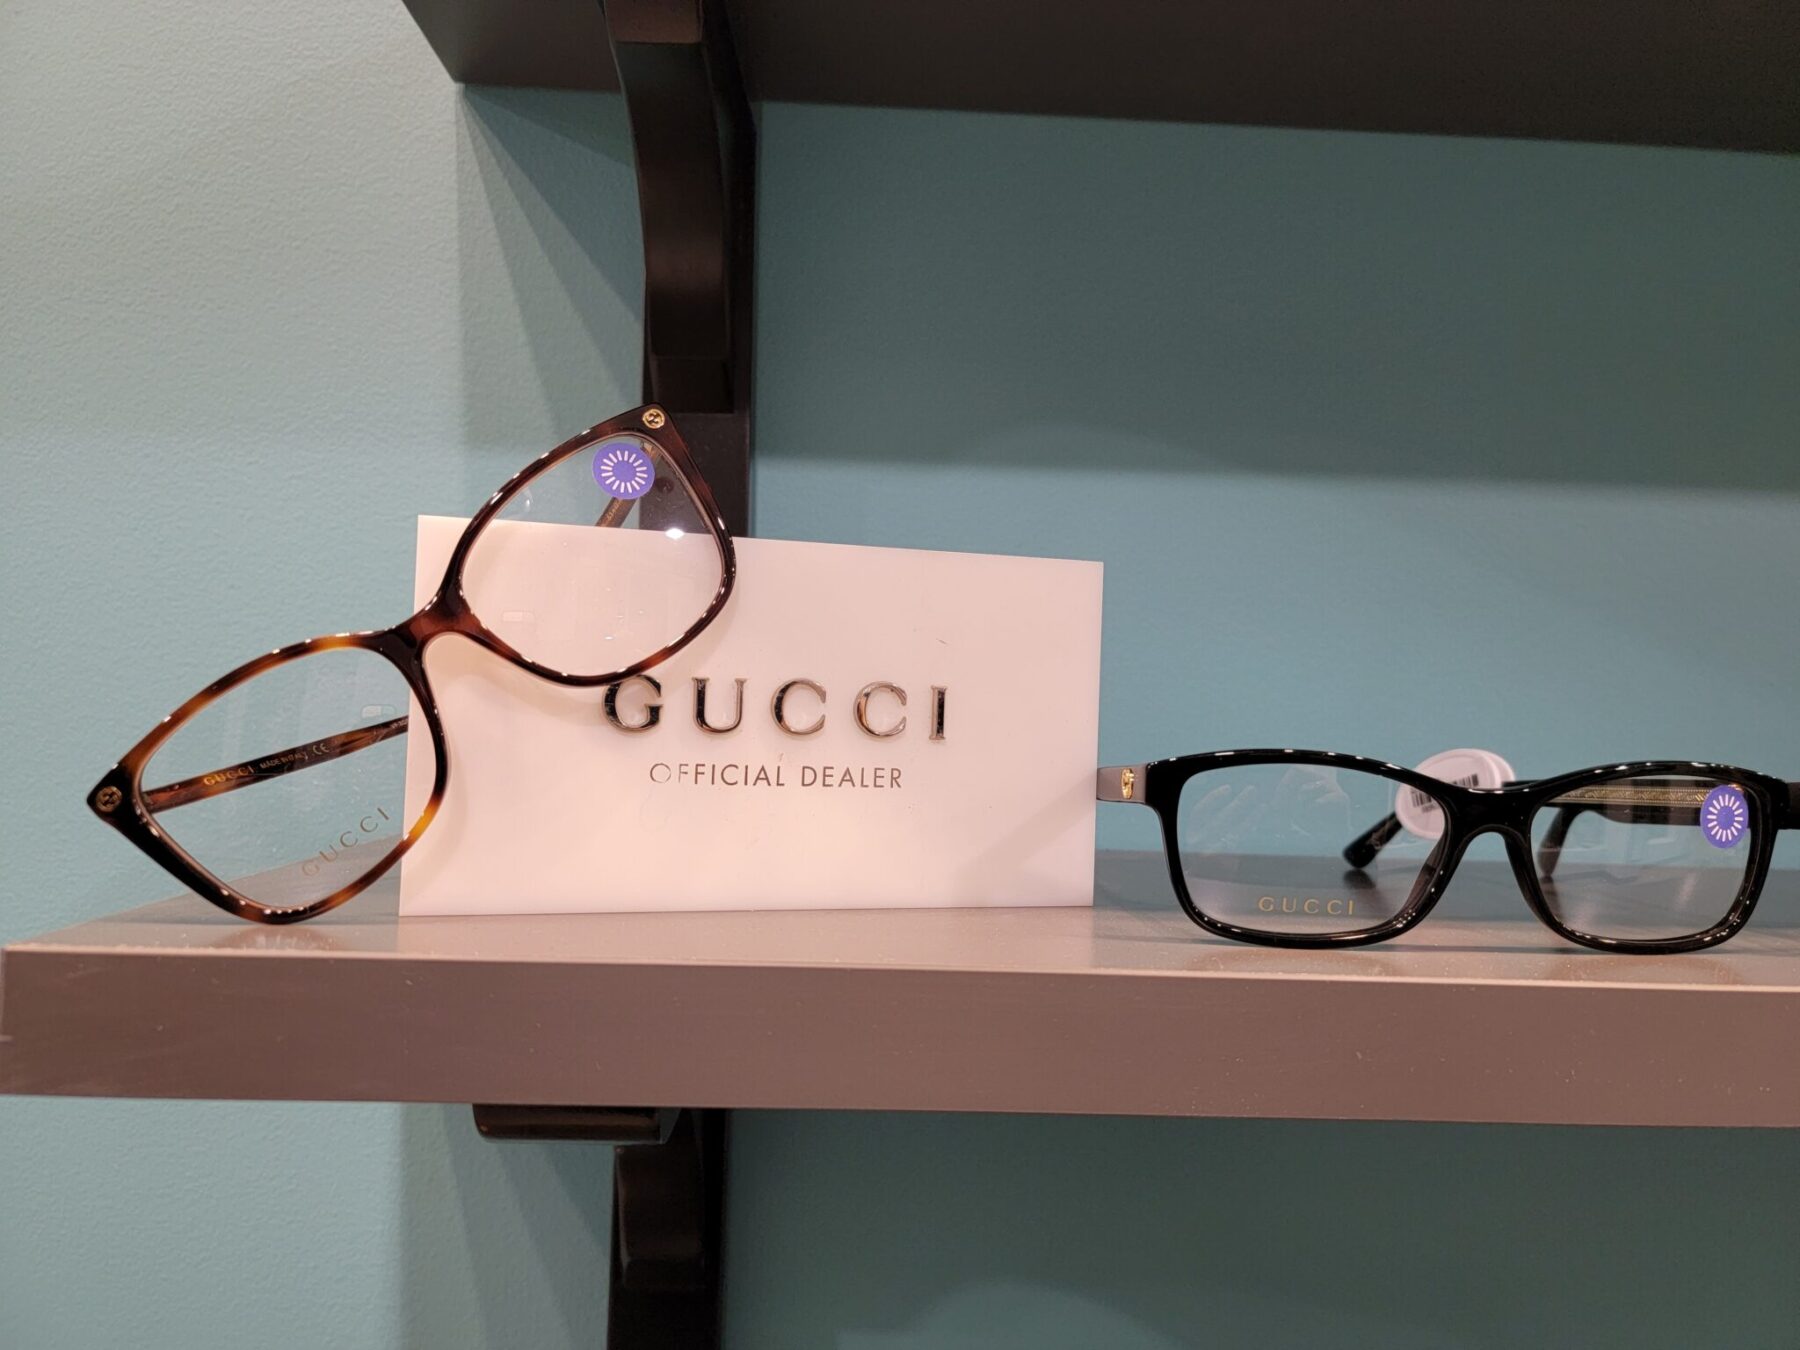 Gucci Eyewear available at Advanced Eyecare of Carteret